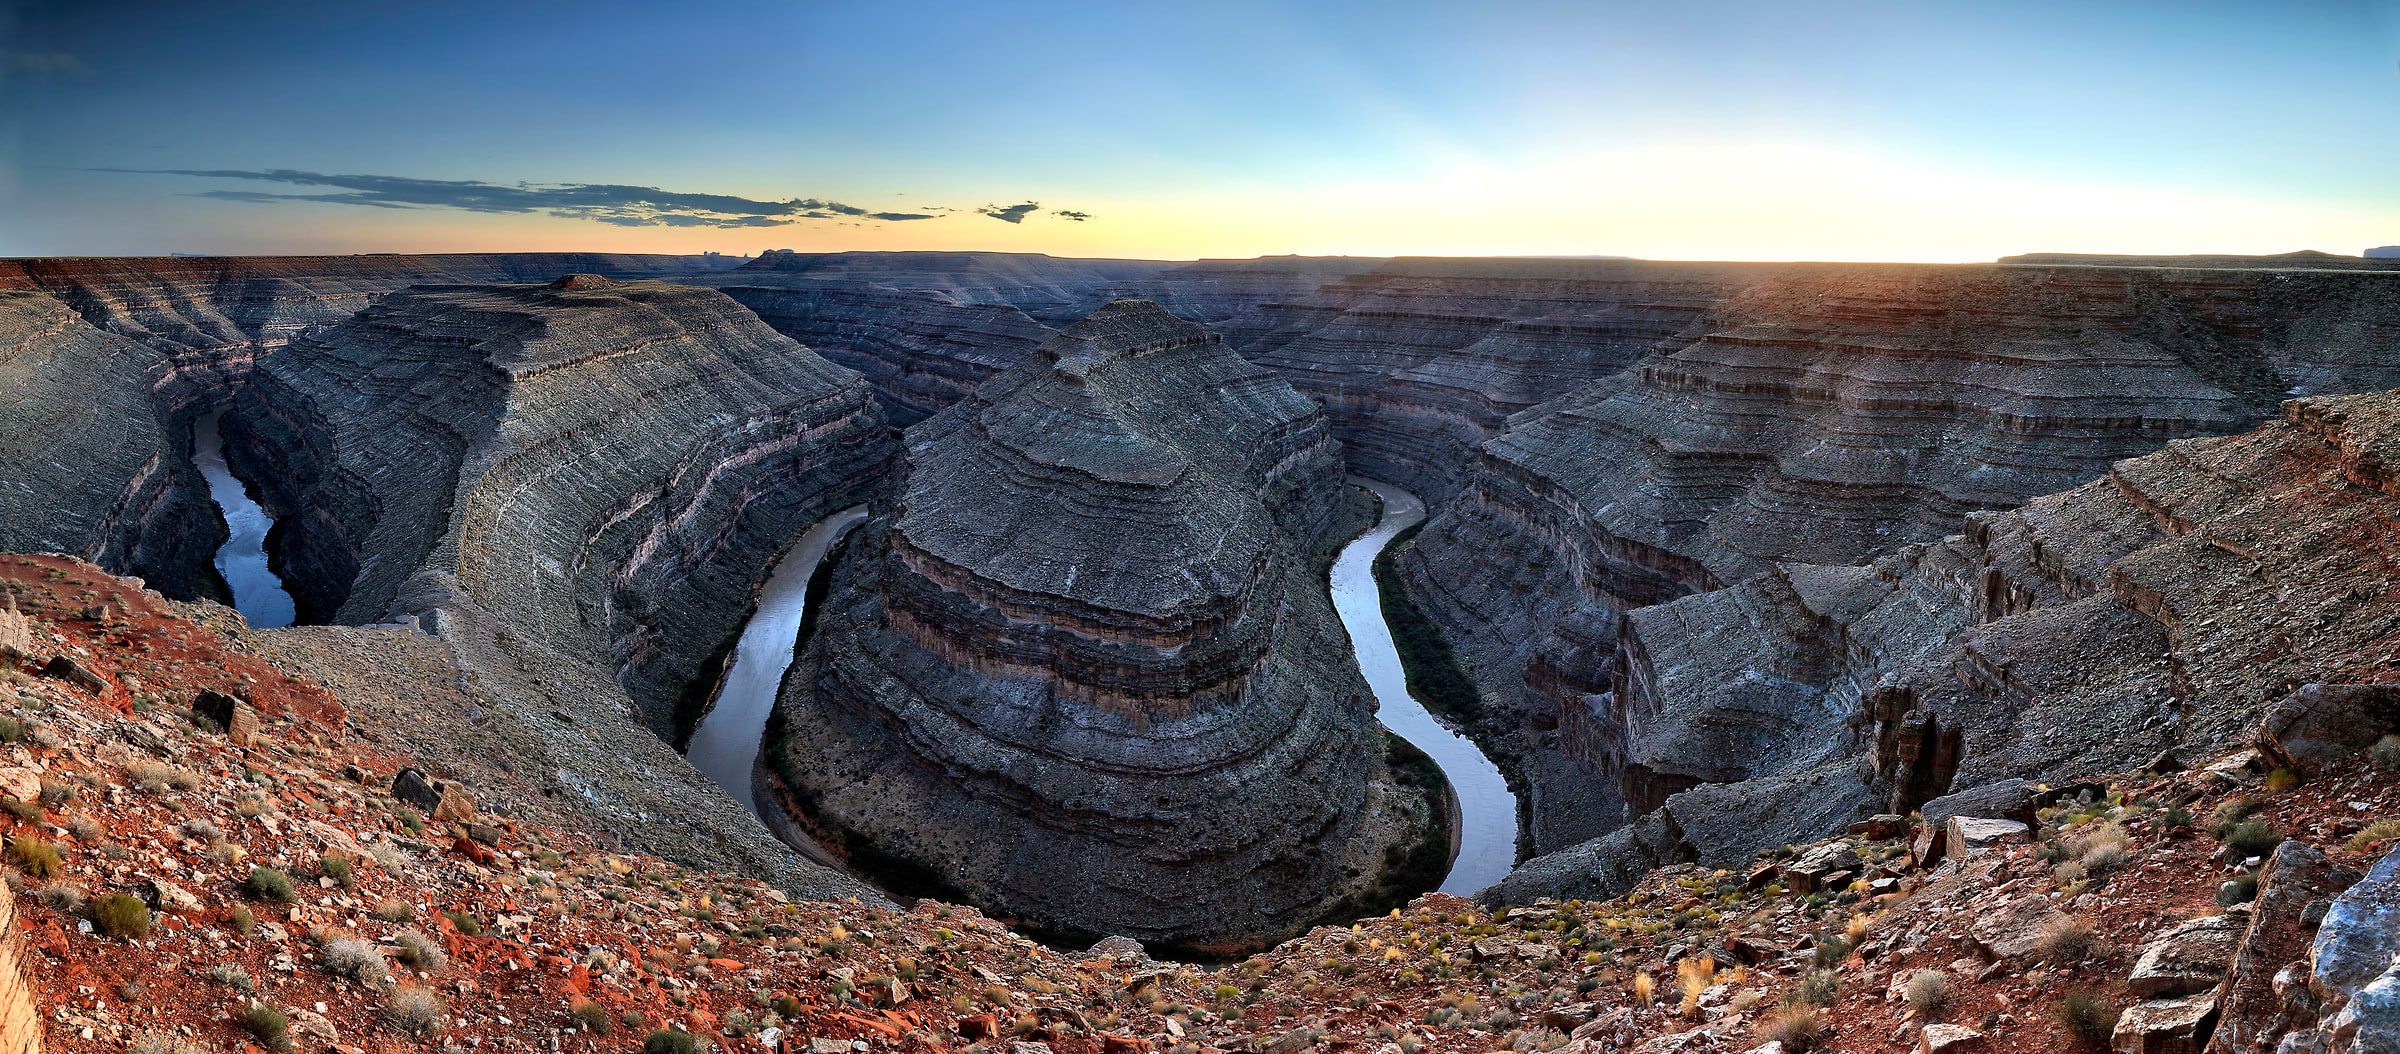 258 megapixels! A very high resolution landscape panorama photo of a canyon; VAST photo created by Phil Crawshay in Goosenecks State Park, Utah 316, Mexican Hat, Utah.